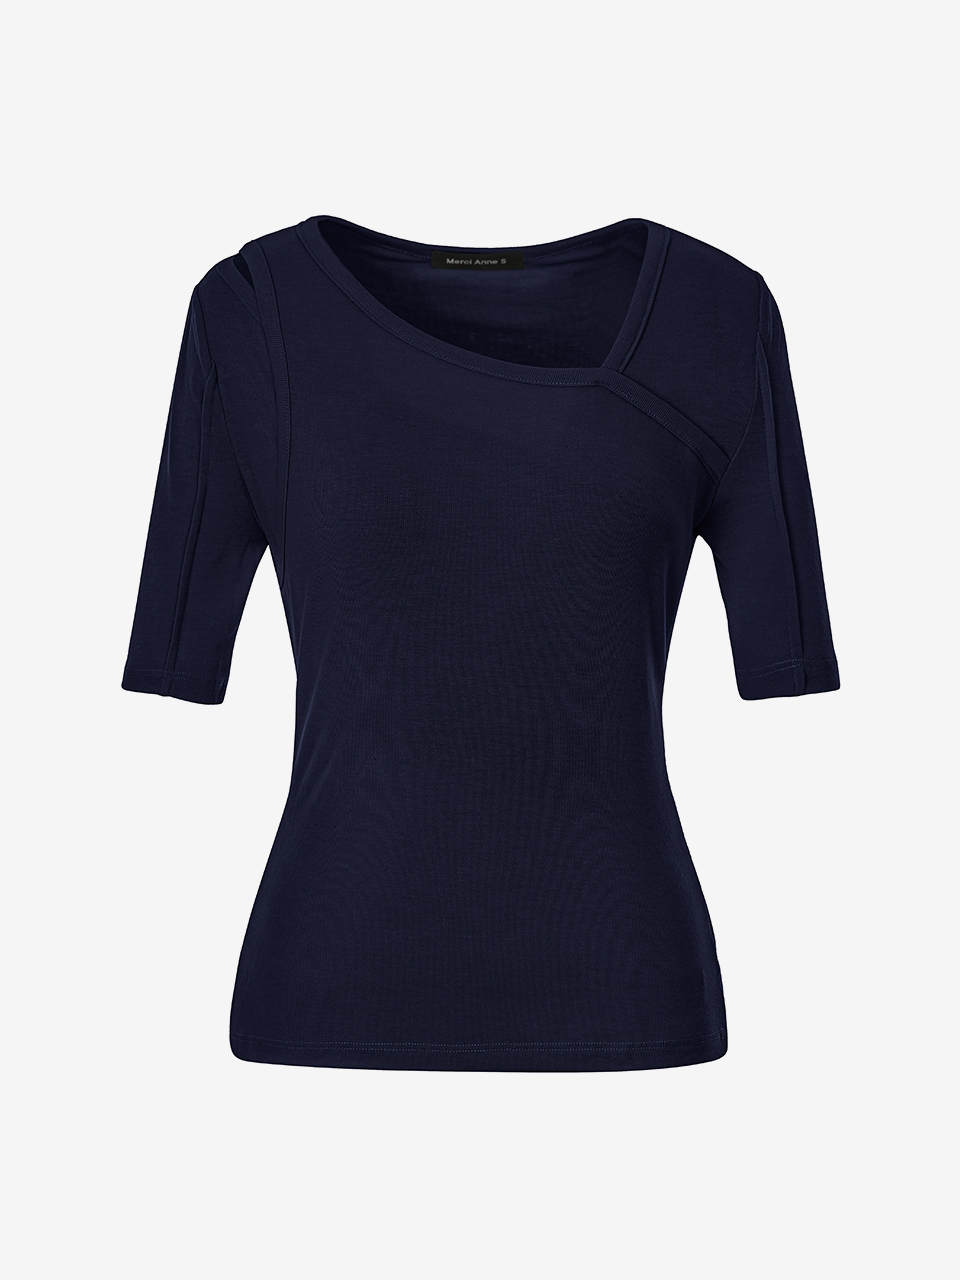 Cut-Out Sleeved T_NAVY (SA4STN1_45)